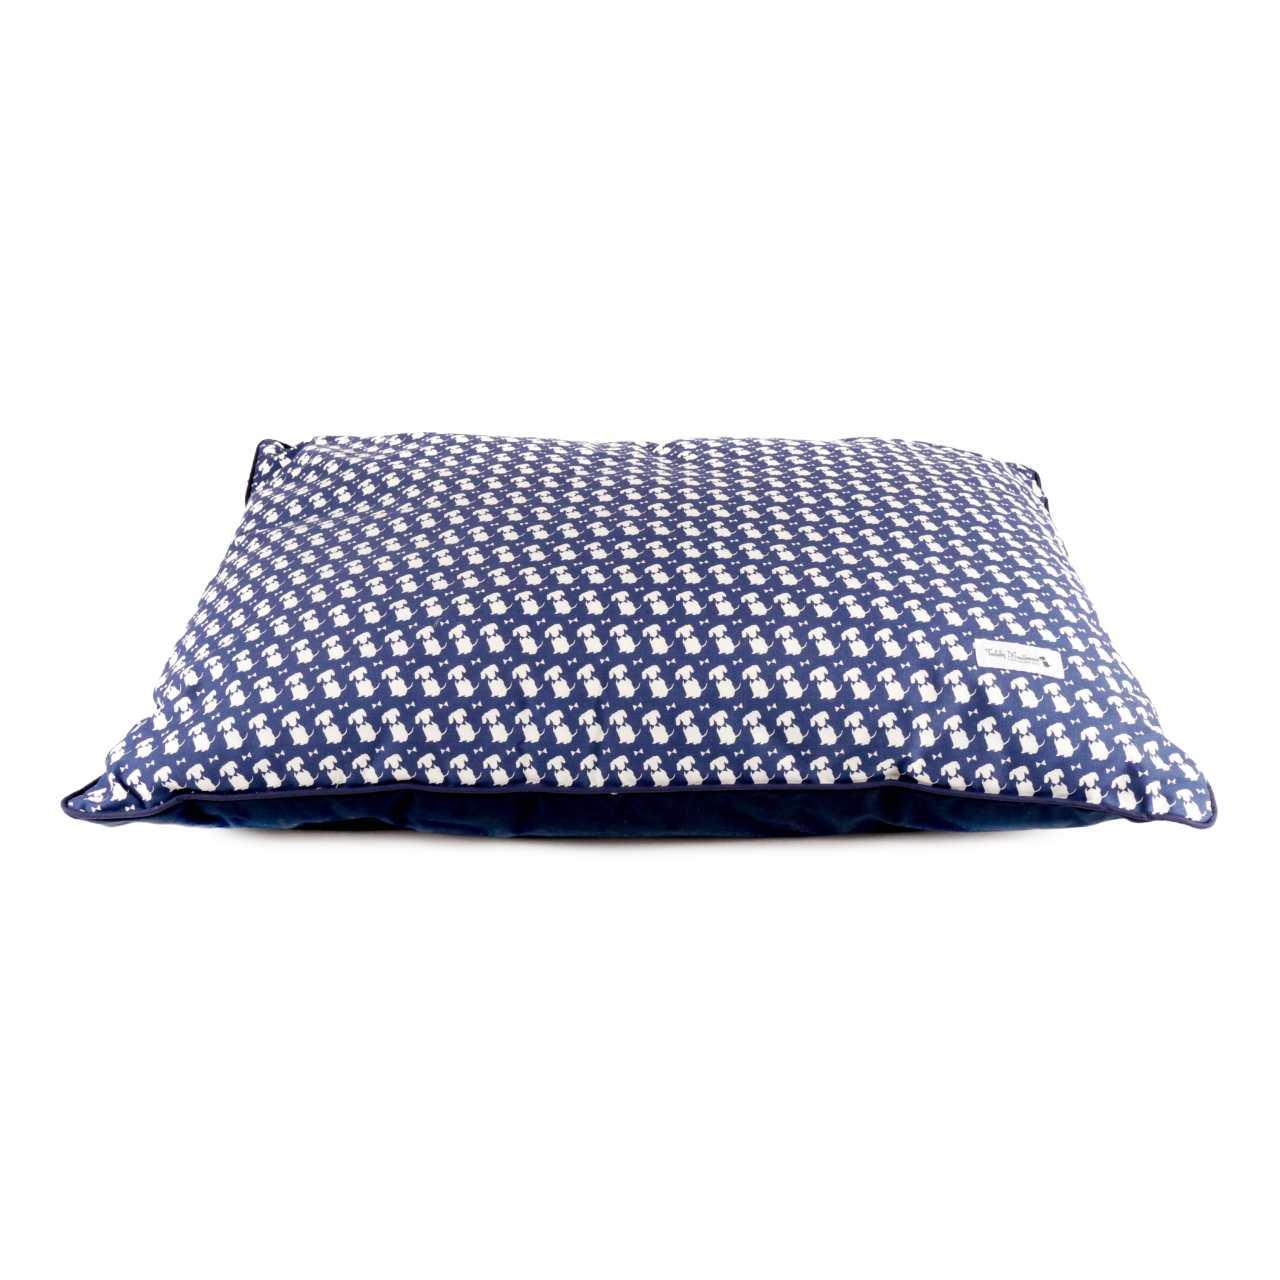 An image of Teddy Maximus Luxury Lounging Cushion Navy Signature Print